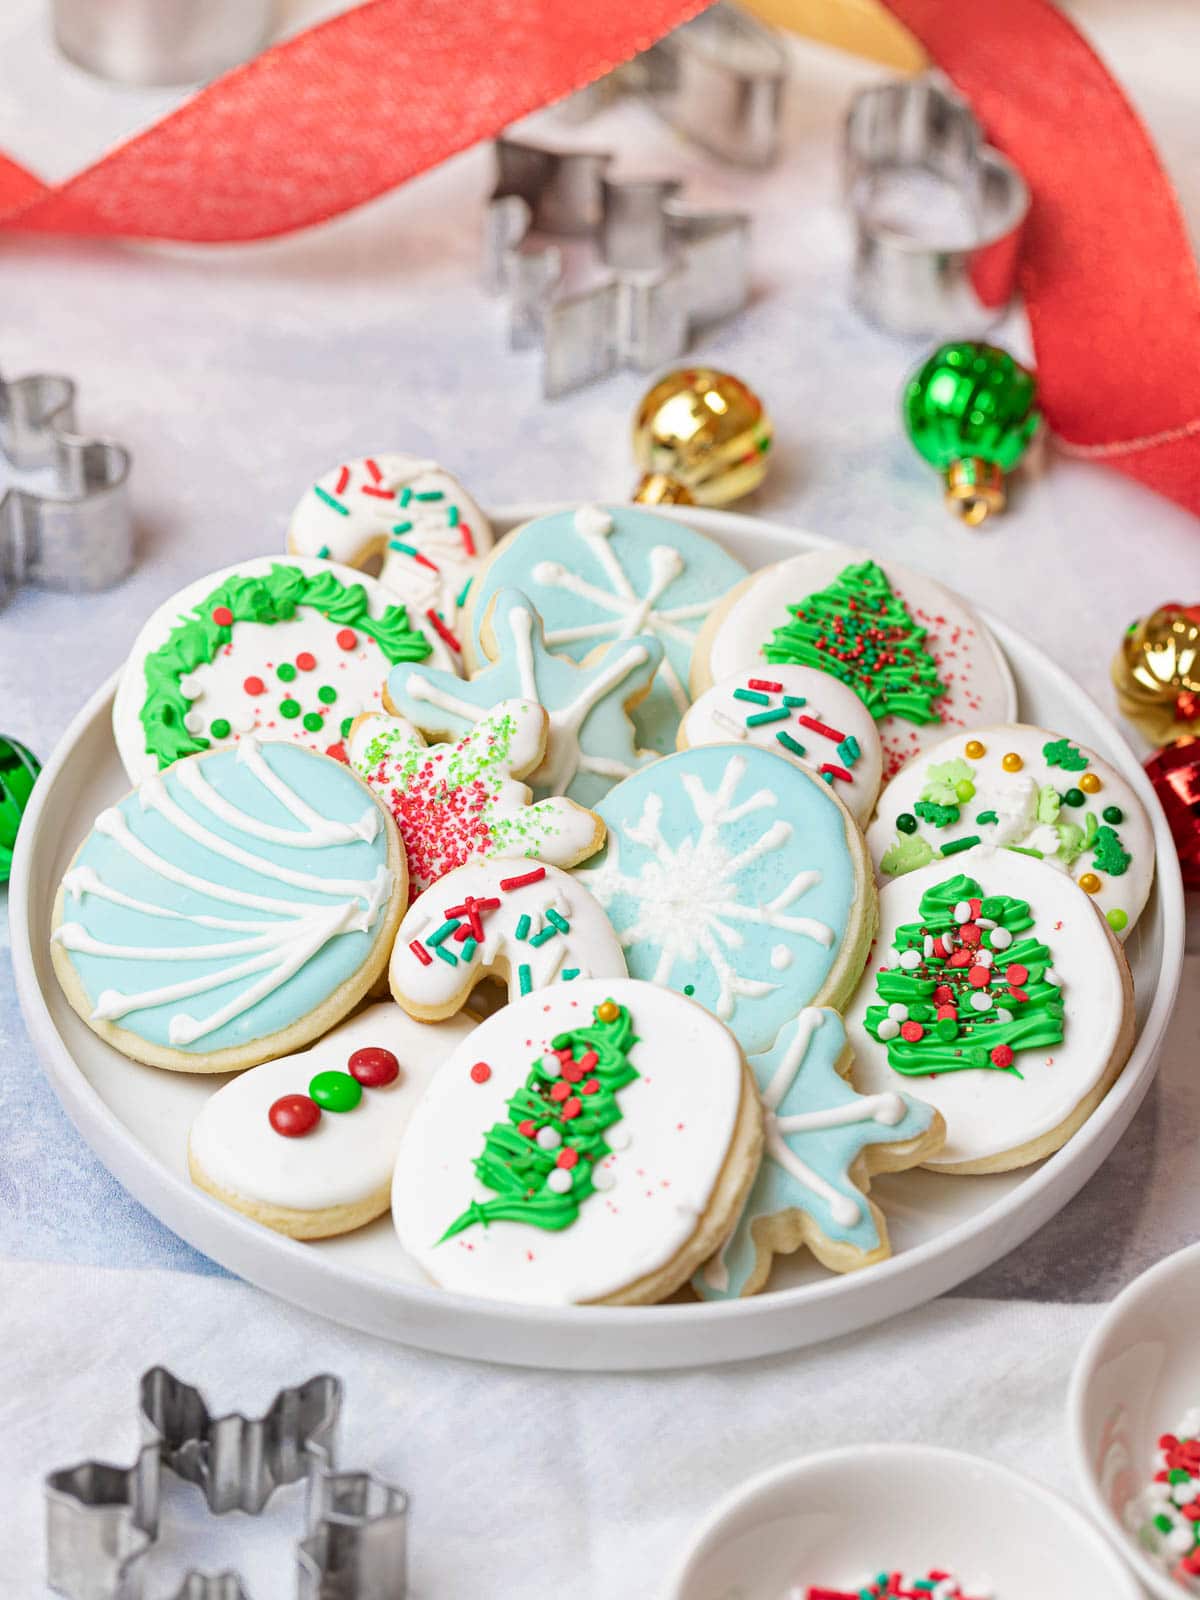 easy Christmas sugar cookies decorated with sprinkles and icing placed on a plate next to ornaments, cookie cutters, and red ribbon